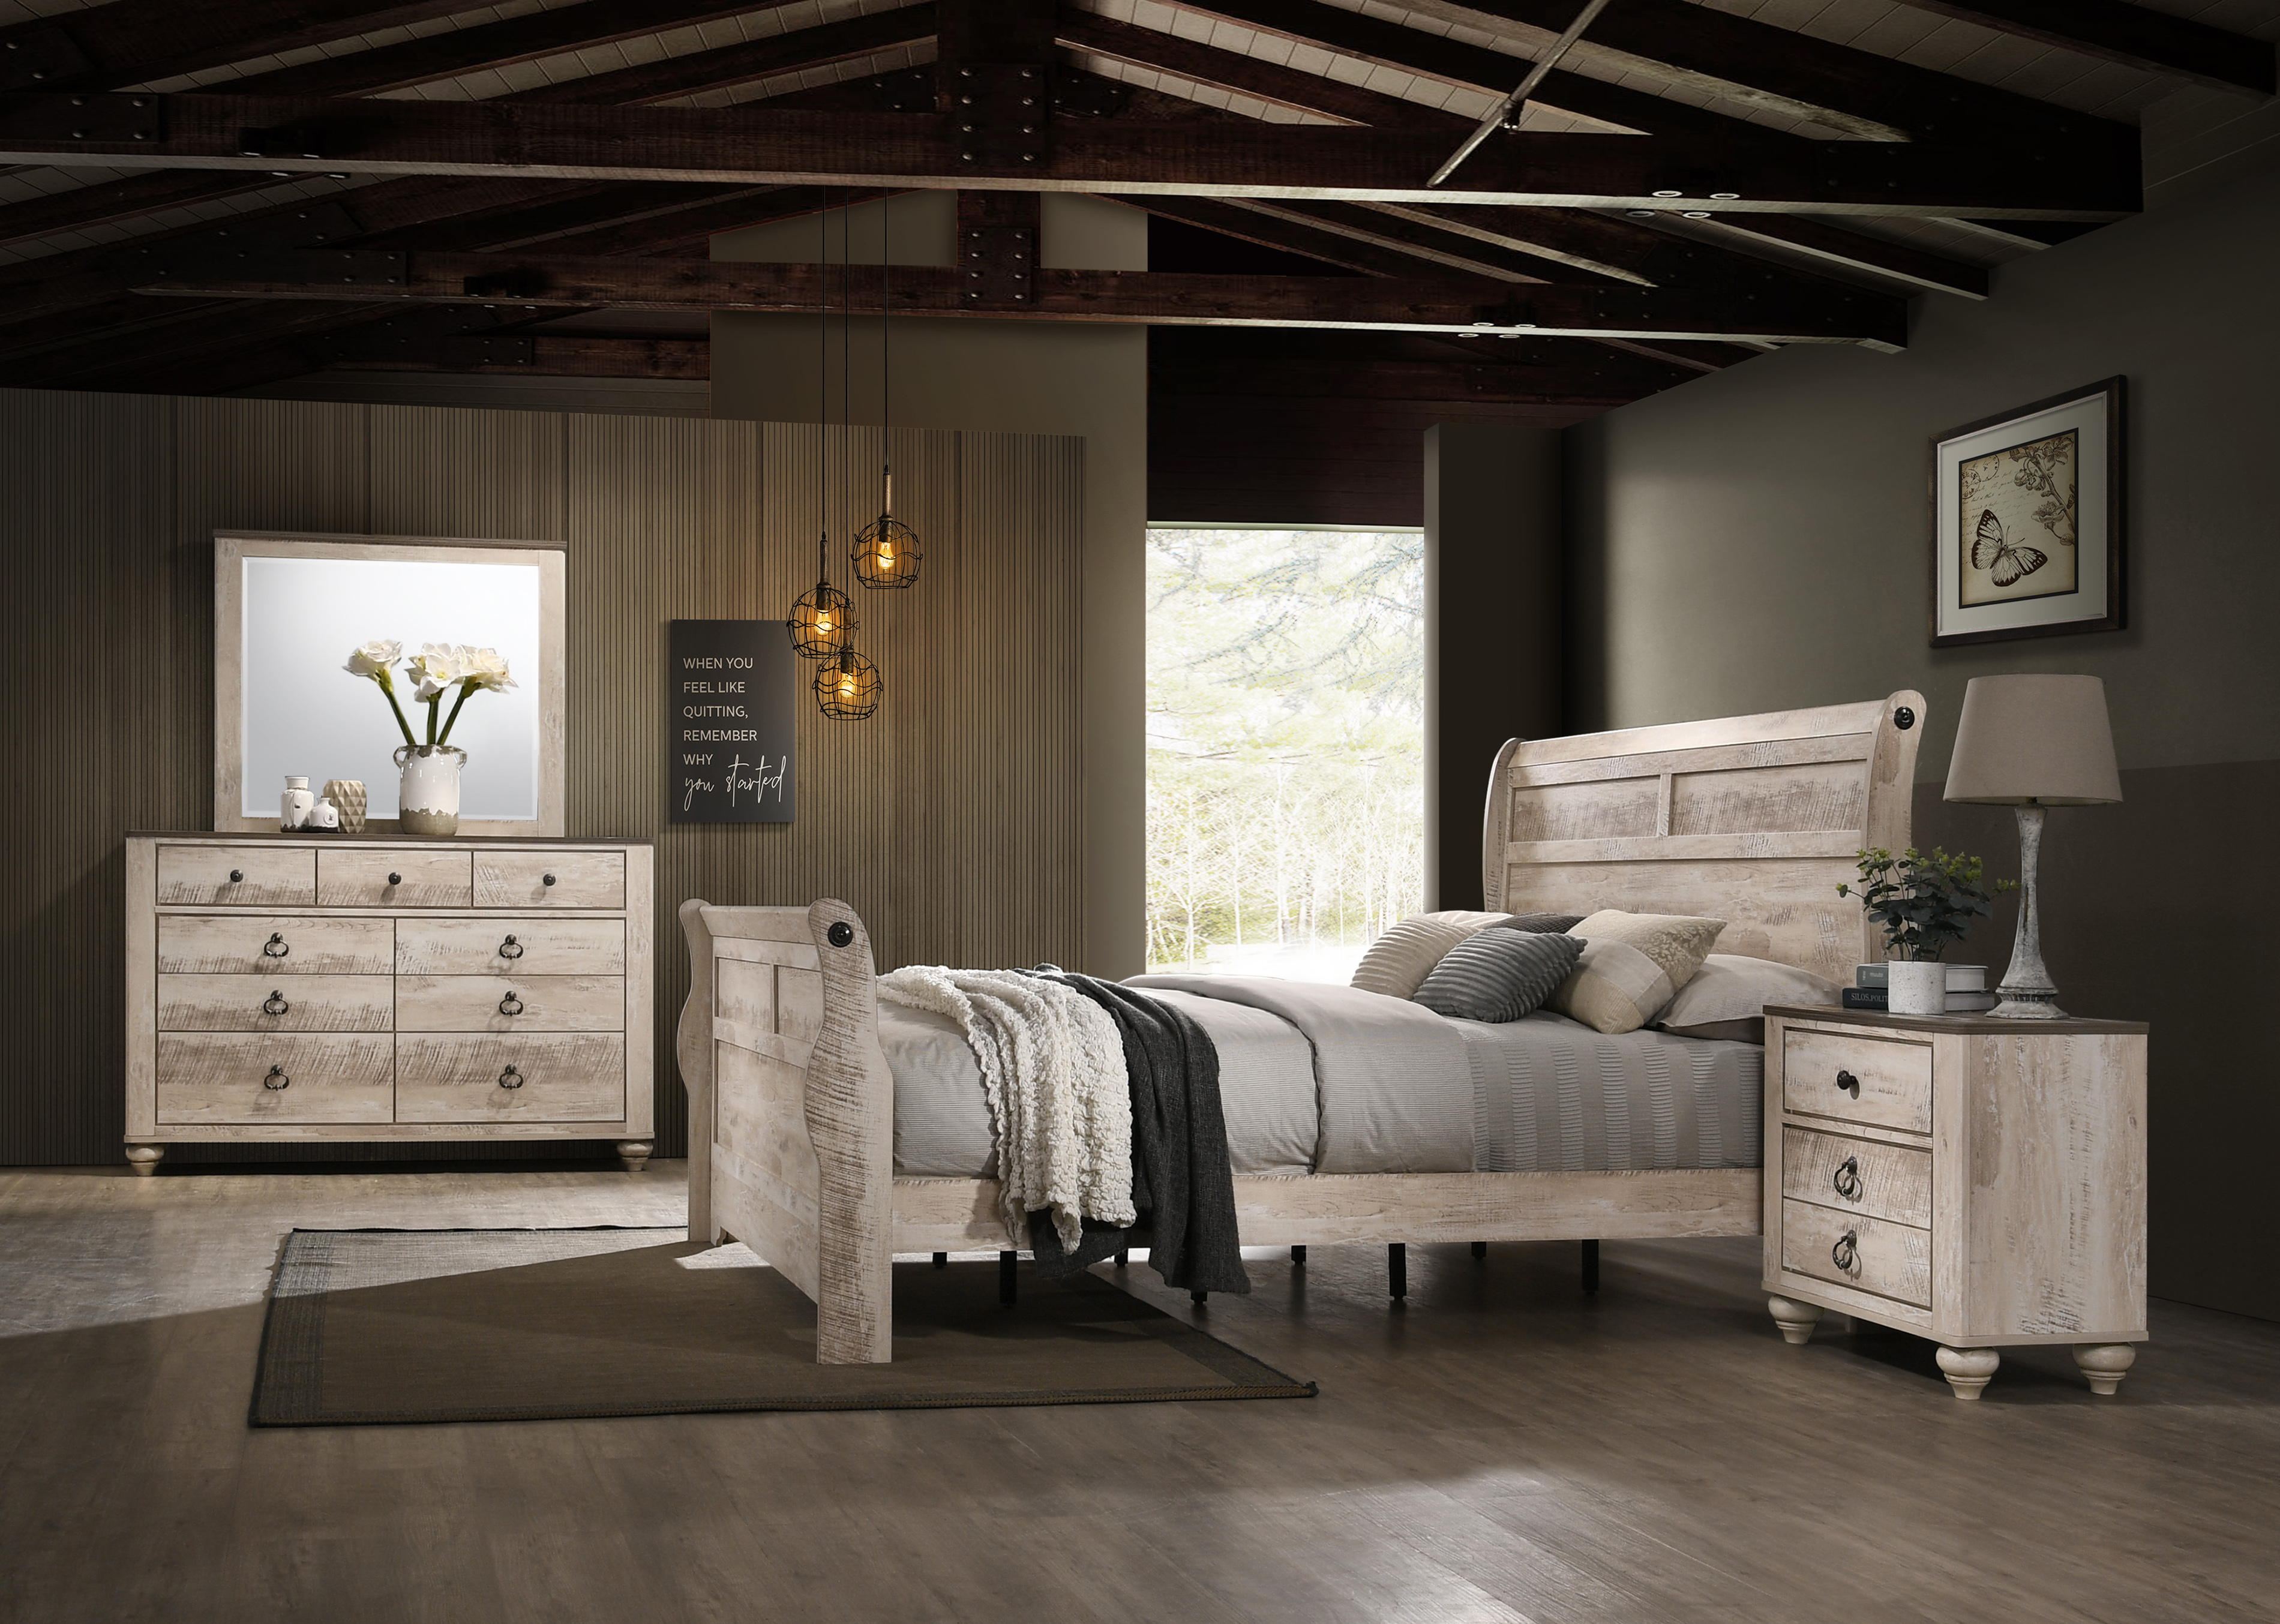 Imerland Contemporary White Wash Finish Bedroom Set with King Sleigh Bed, Dresser, Mirror, Two Nightstands - image 2 of 12